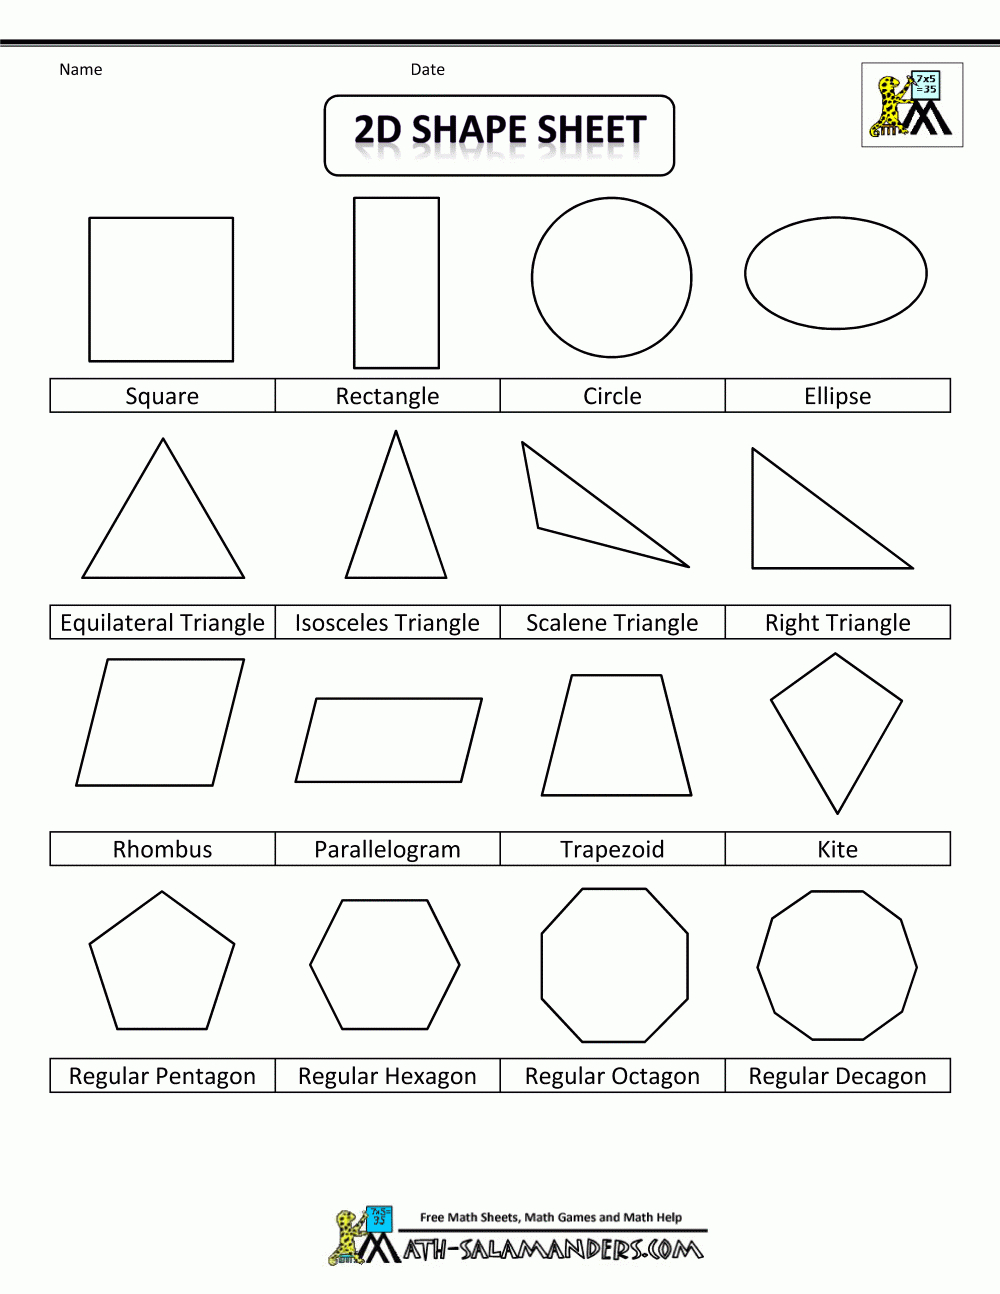 Printable Shapes 2D And 3D - Free Printable Shapes